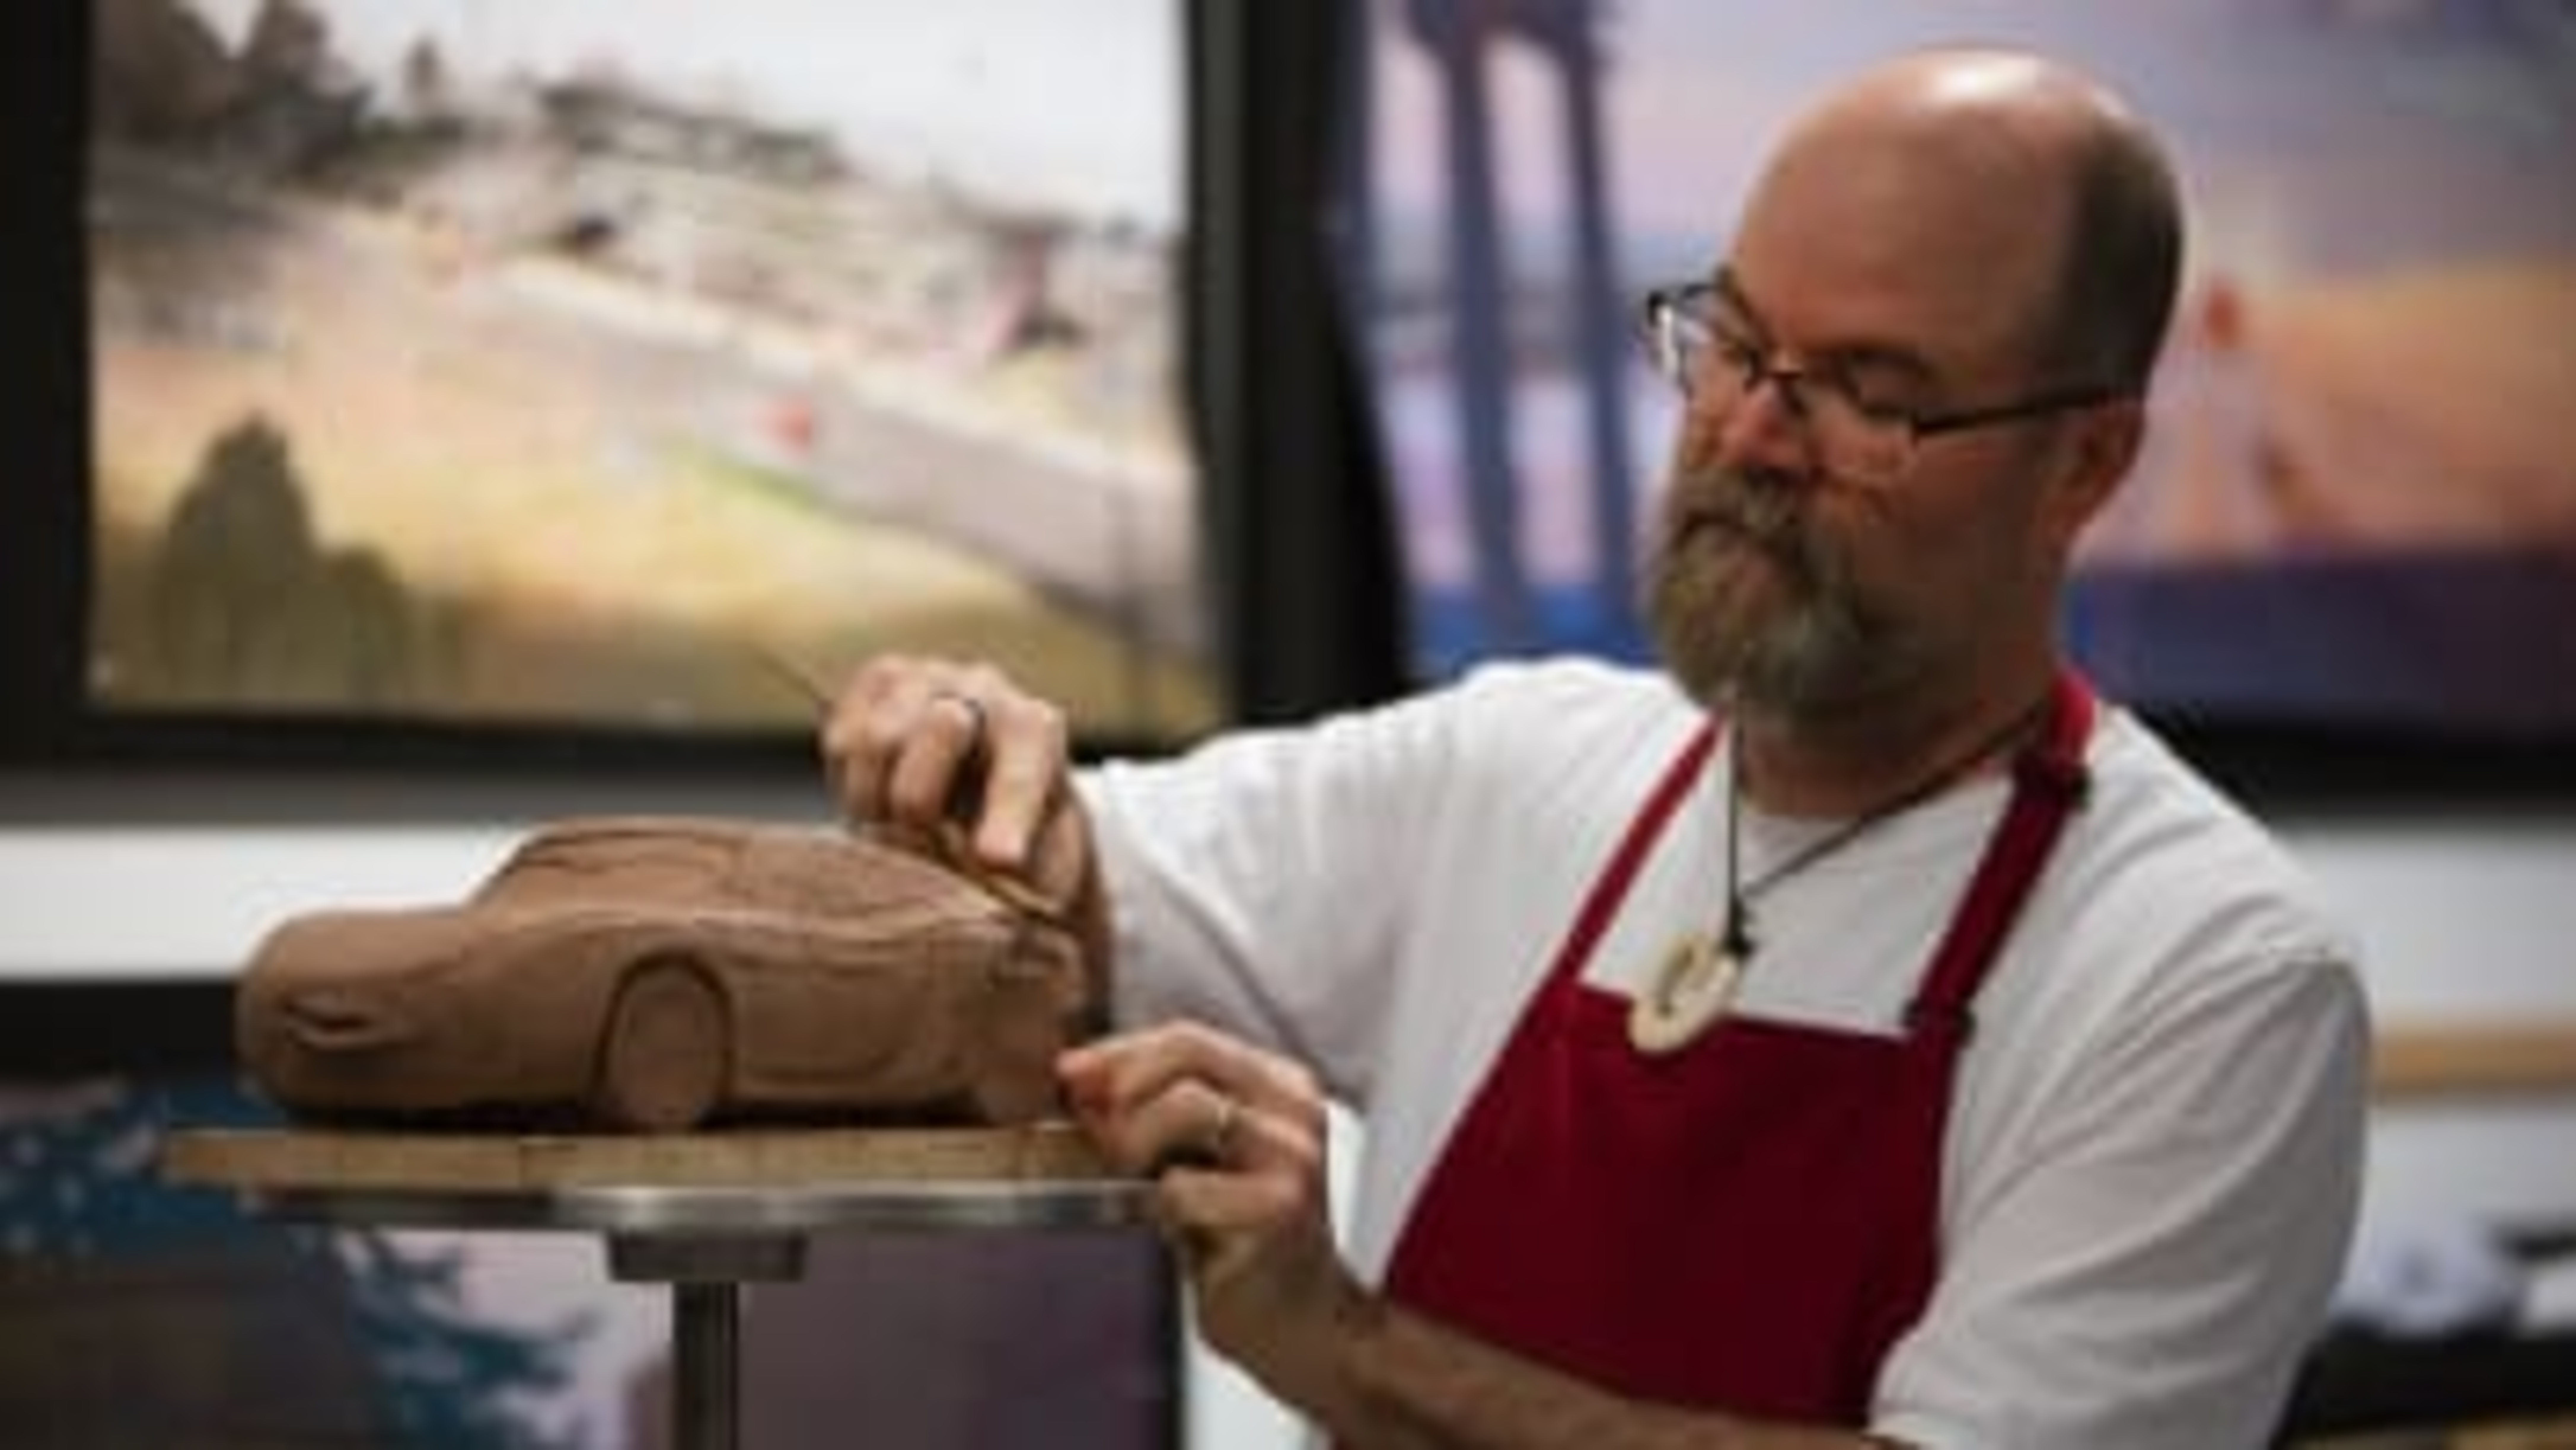 Various automotive press members visit Pixar Animation Studios and listen to presentations by "Cars 3" filmmakers, including sculptor Jerome Ranft, get a tour of Fantasy Junction and get a behind the scenes look at the film, as seen on May 10, 2017 in Emeryville, Calif. (Photo by Deborah Coleman / Pixar)